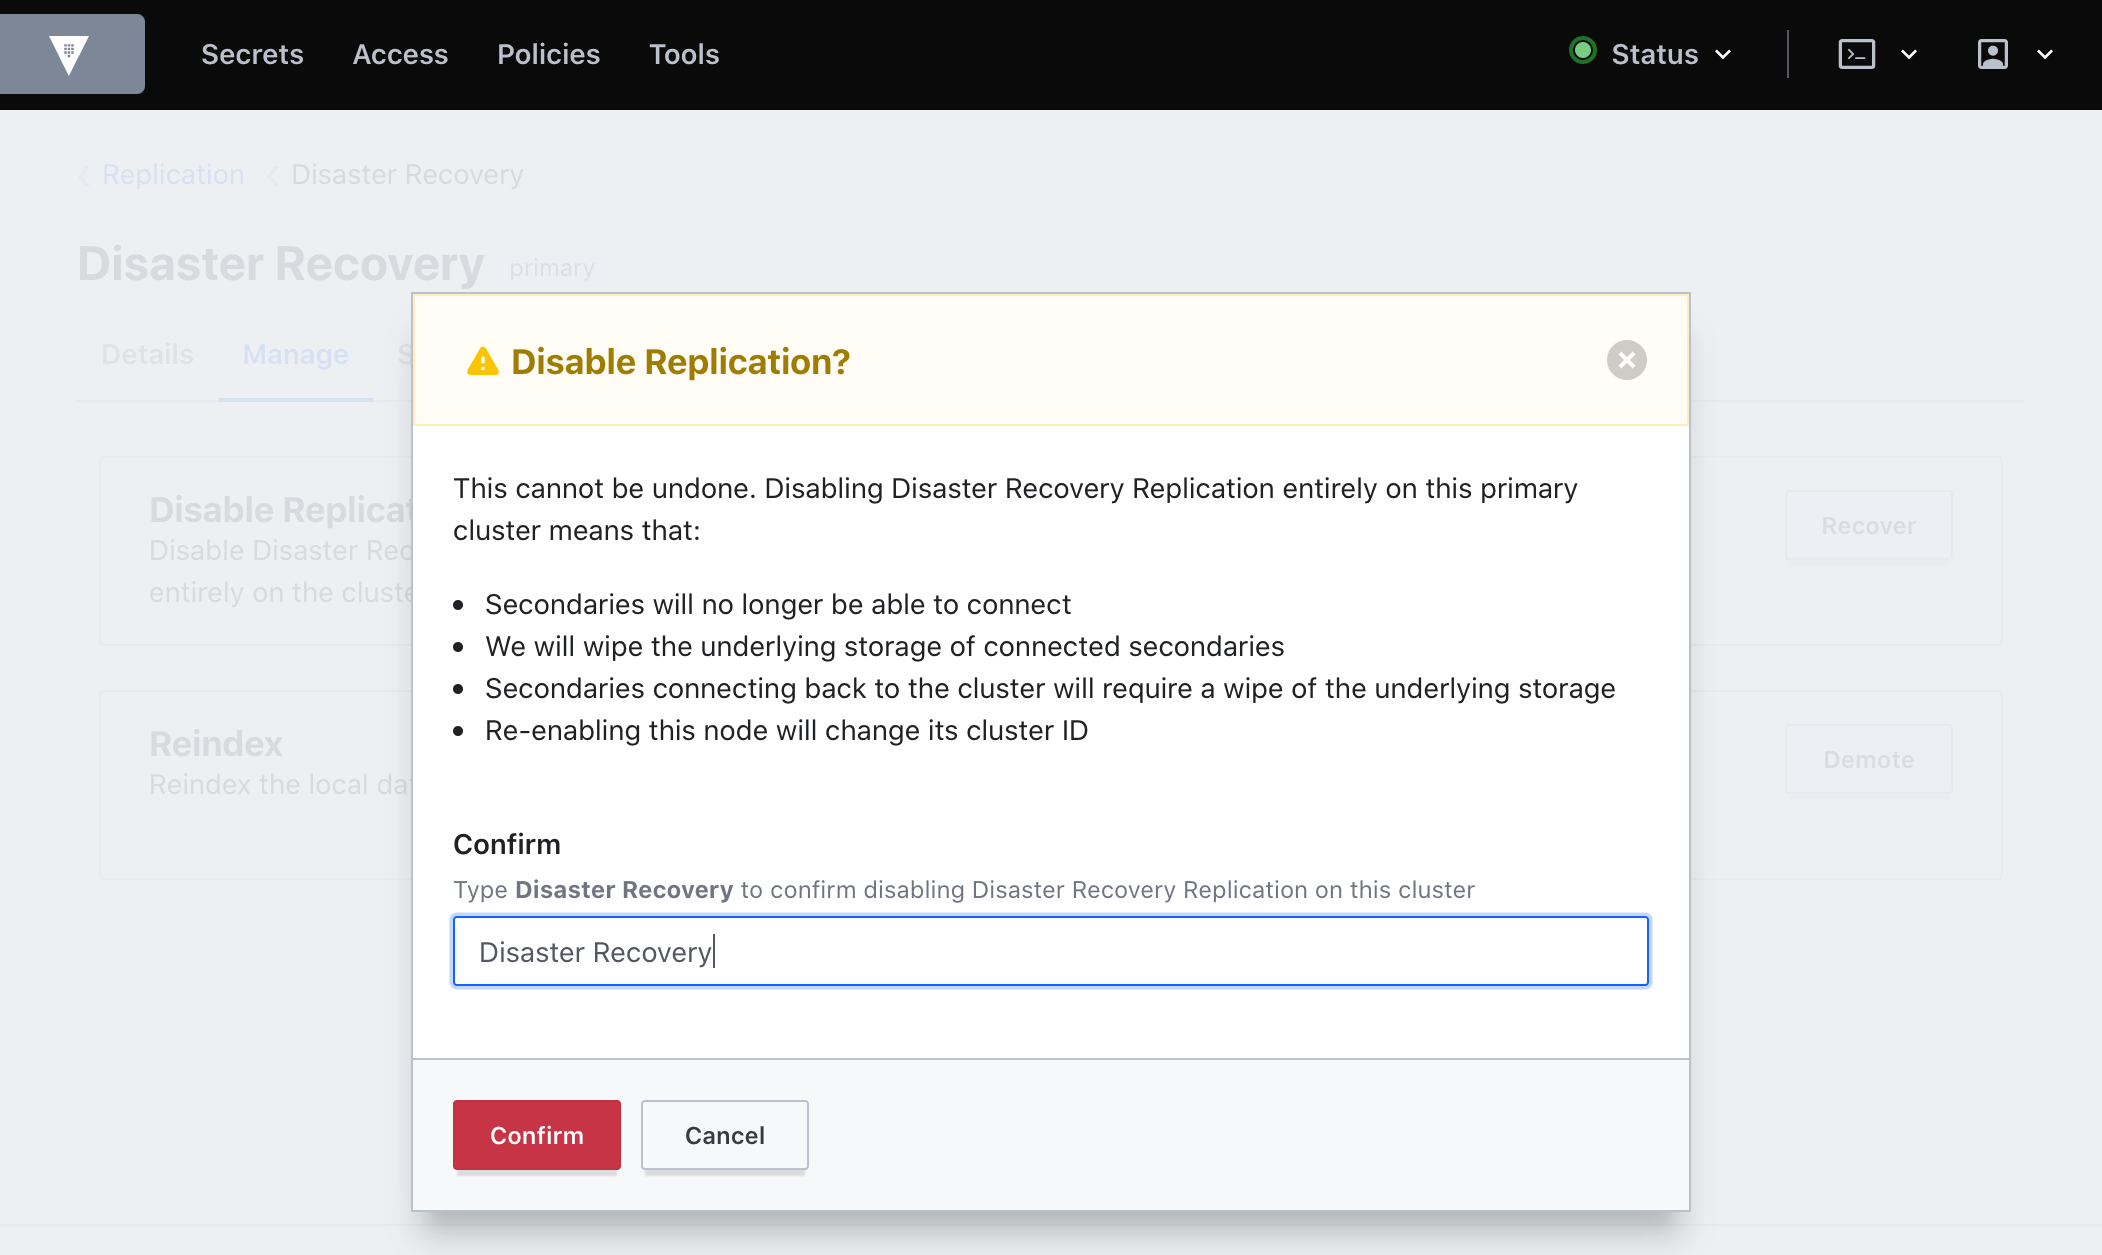 Disable replication modal in the manage tab